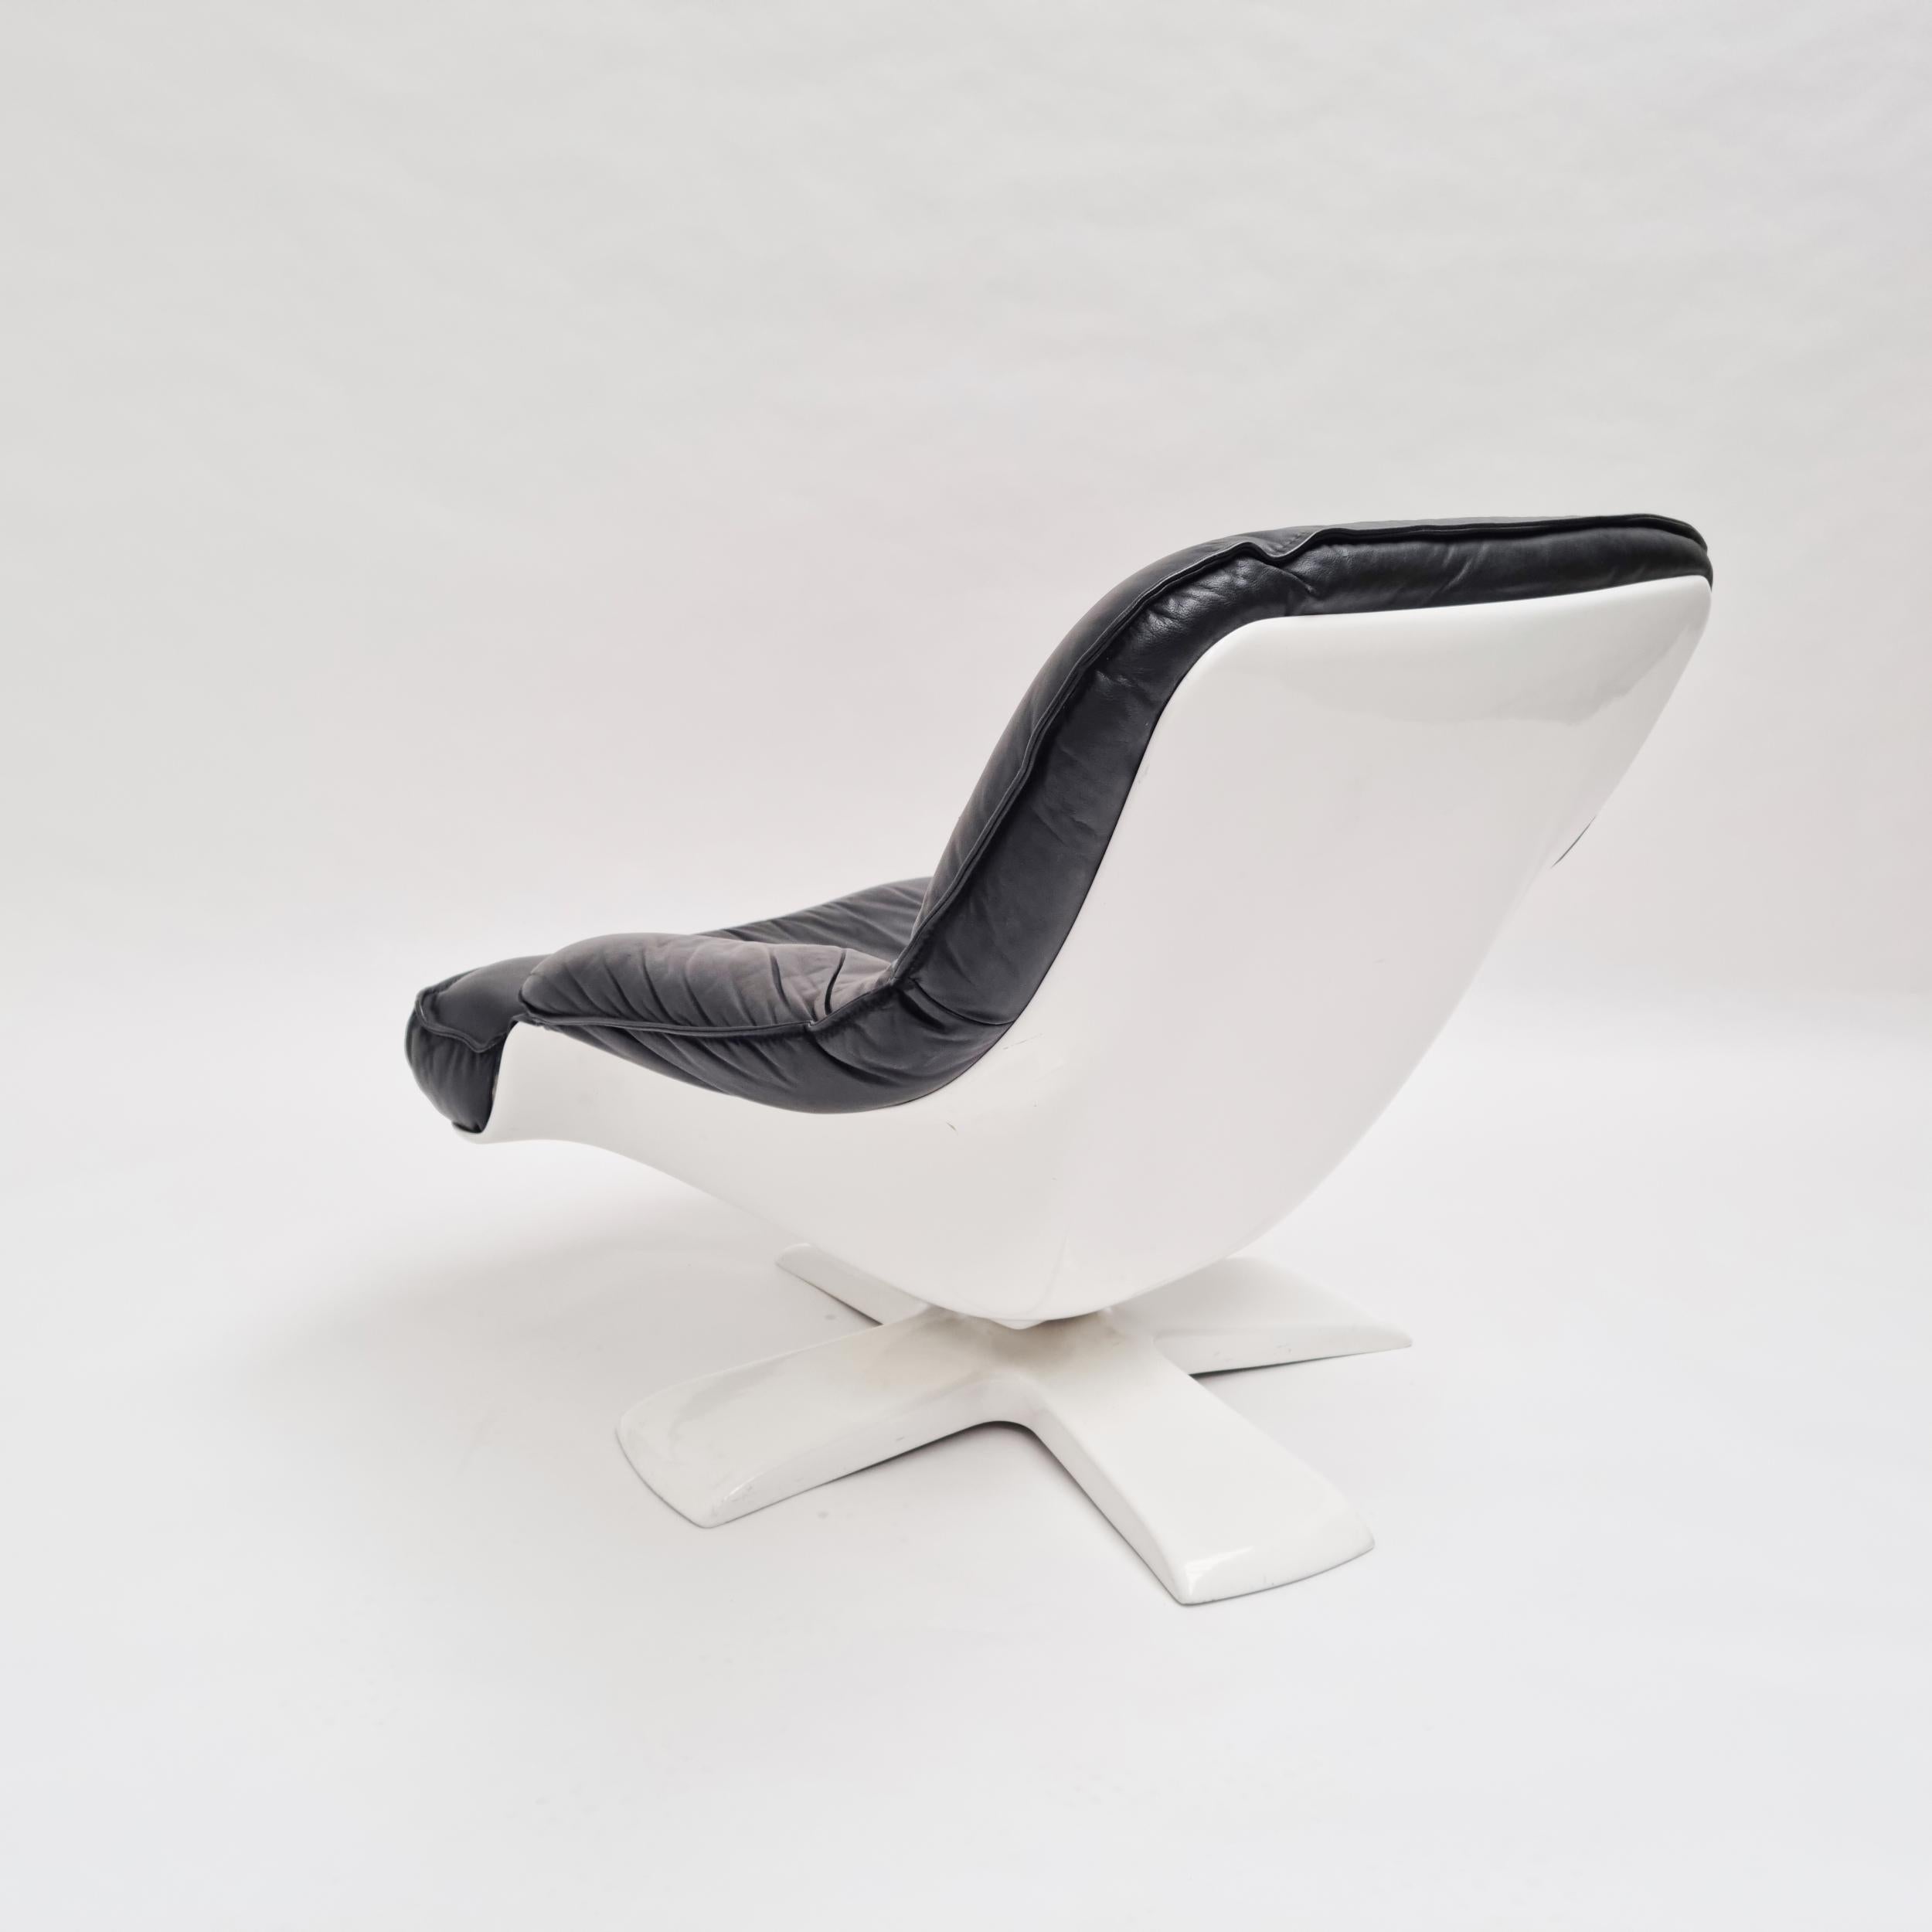 Dutch Space Age Lounge Chair In White Fiberglass Black Leather, 1970s